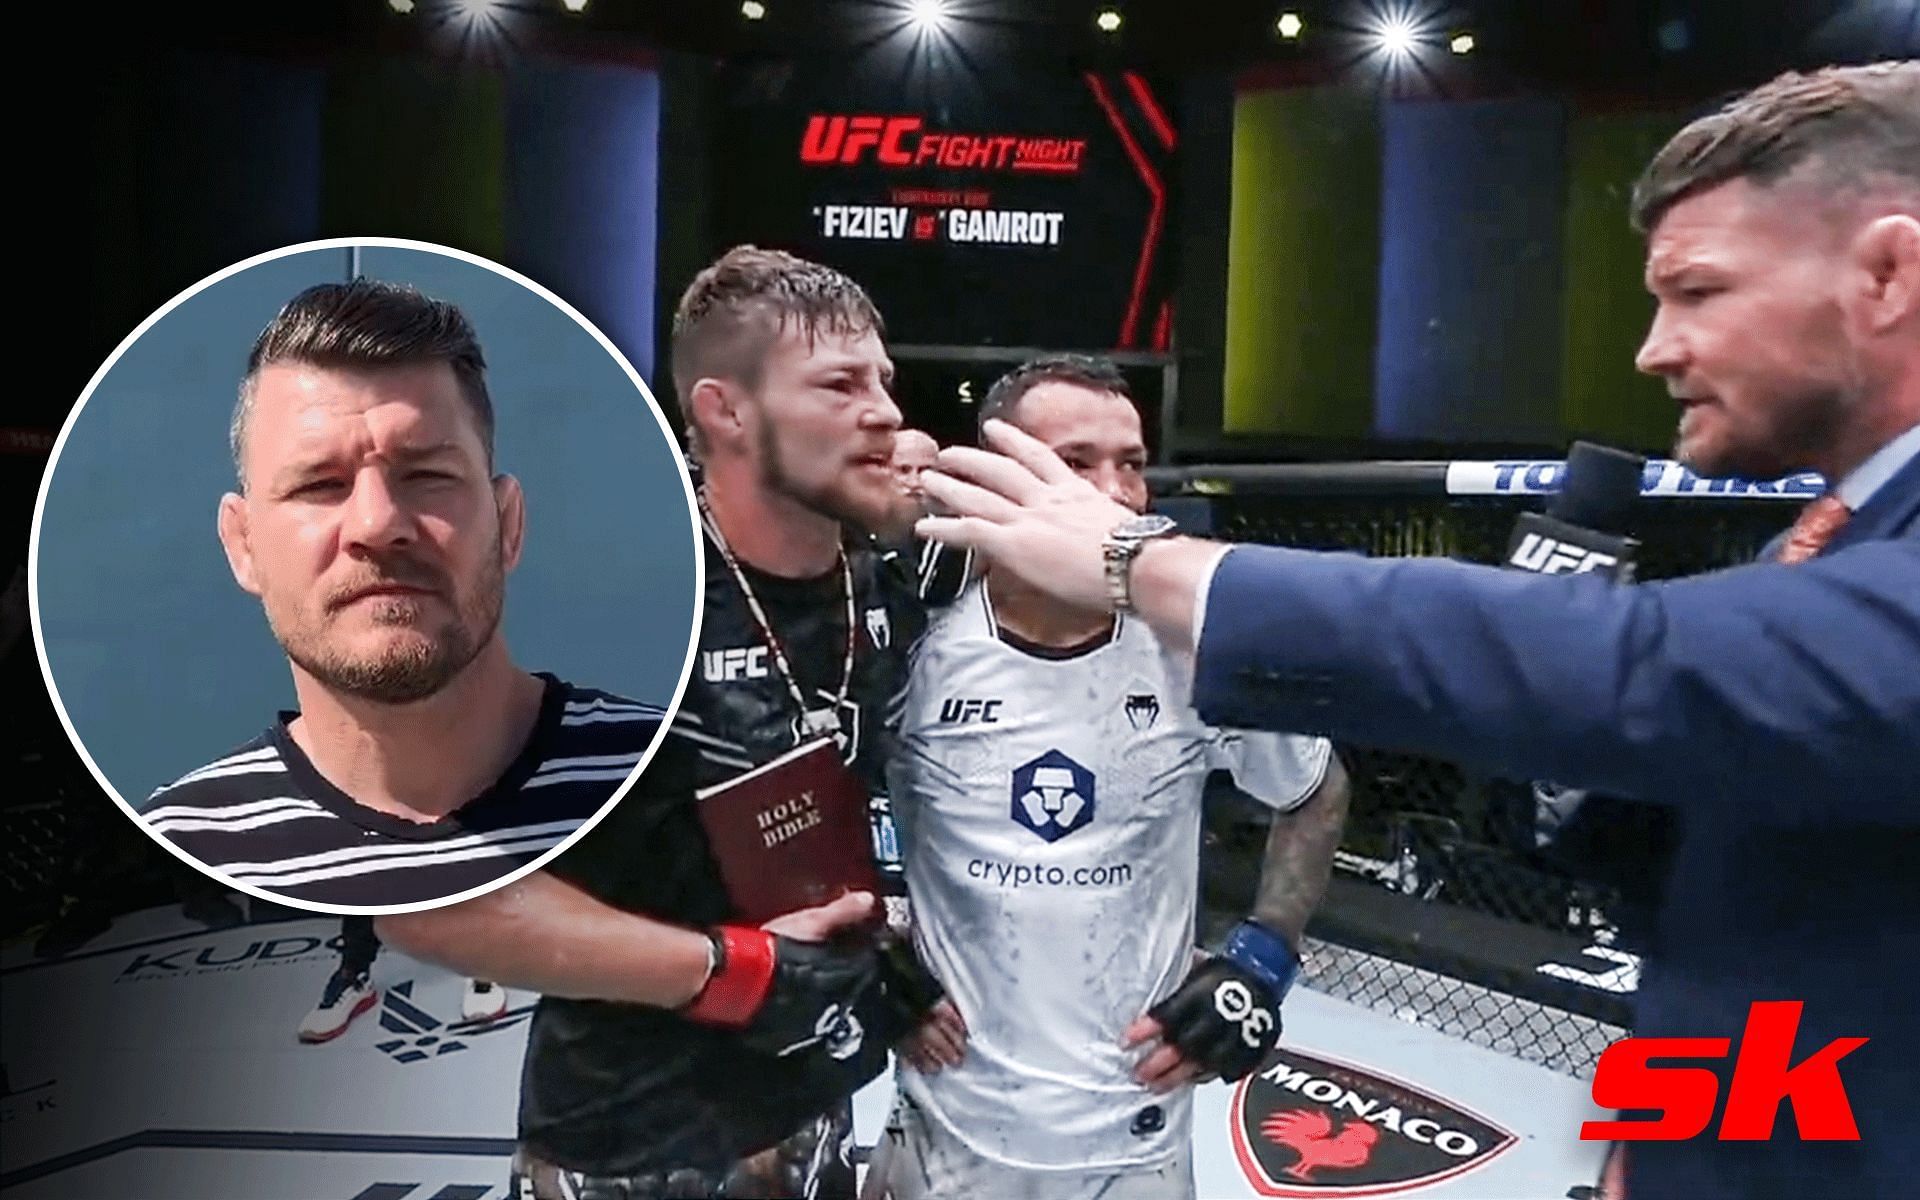 Michael Bisping (left) during octagon interview with Bryce Mitchell (Images via @bisping Instagram and @ufc official YouTube channel)